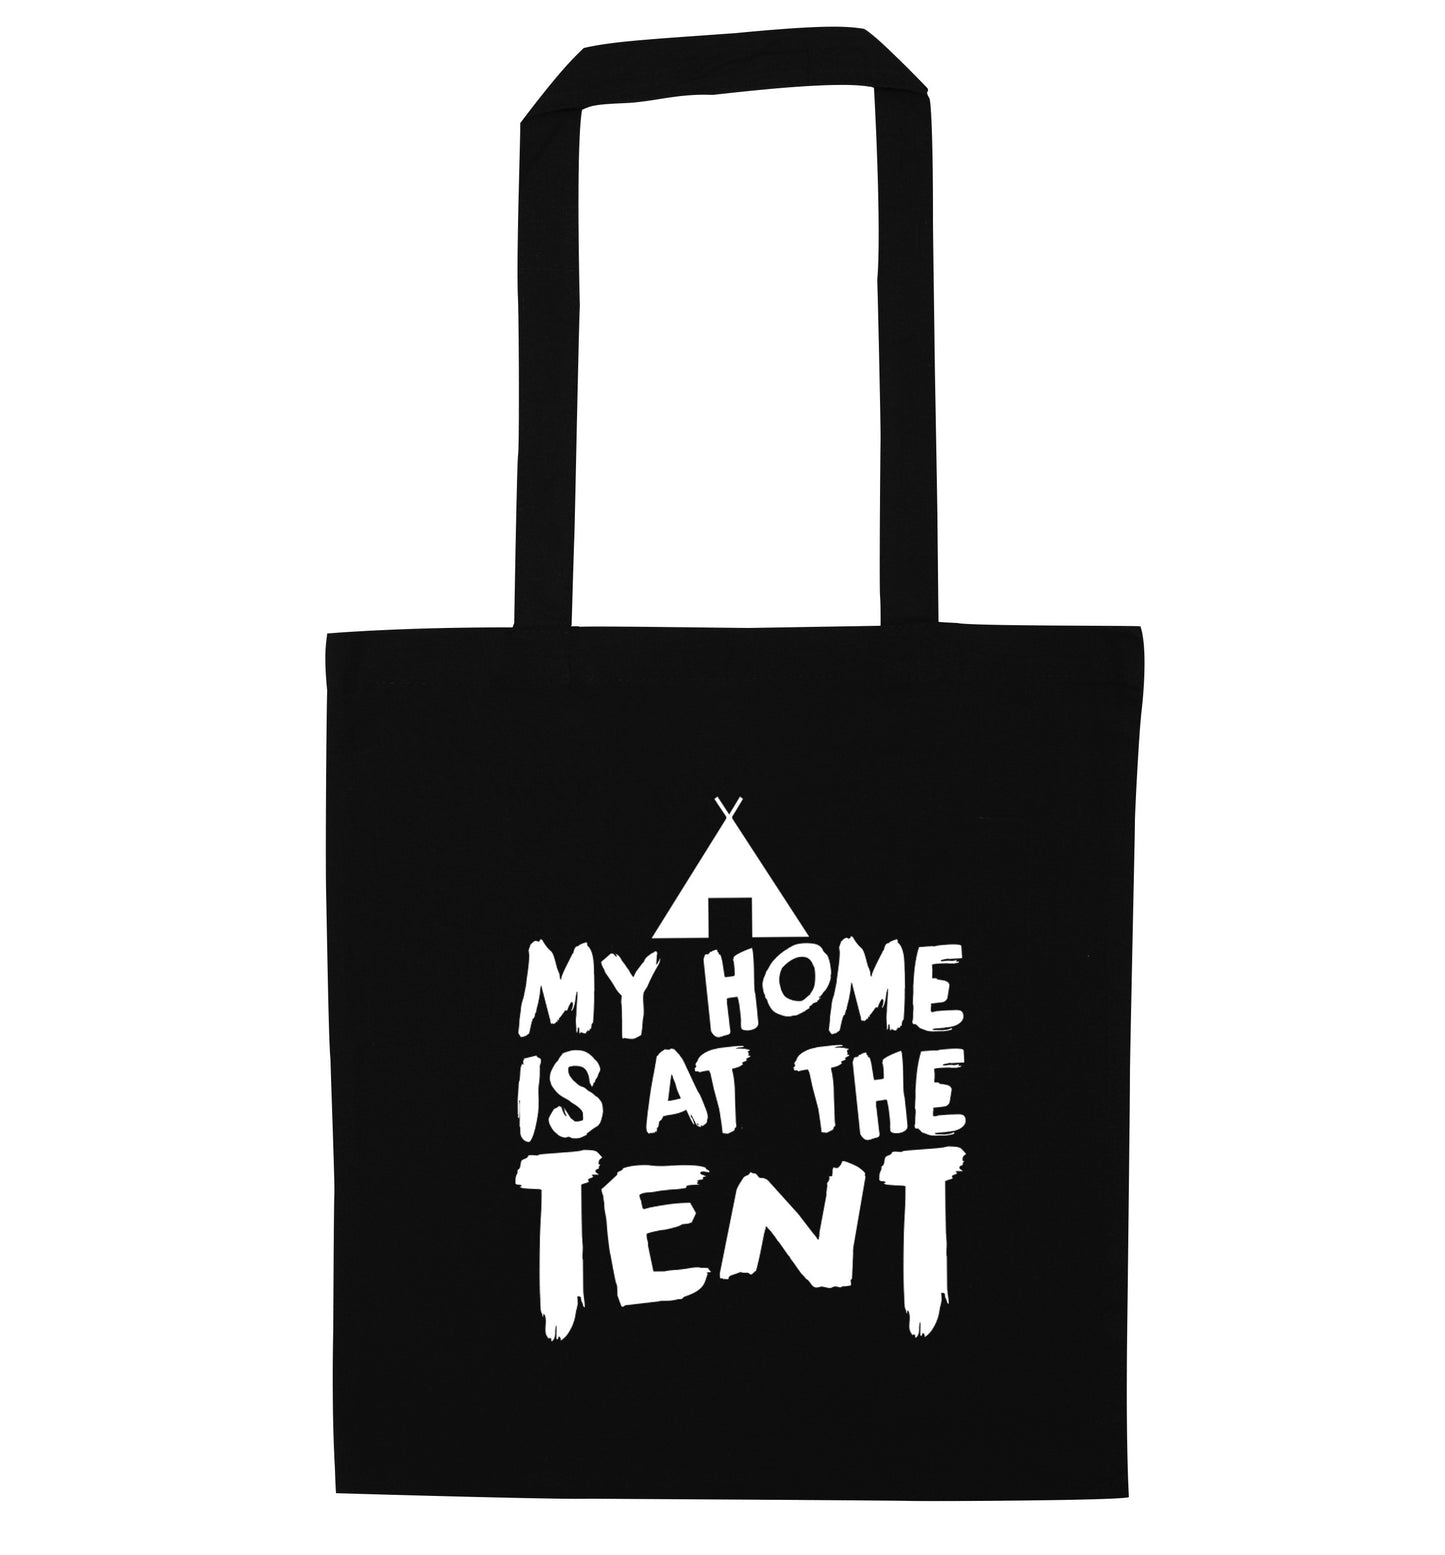 My home is at the tent black tote bag